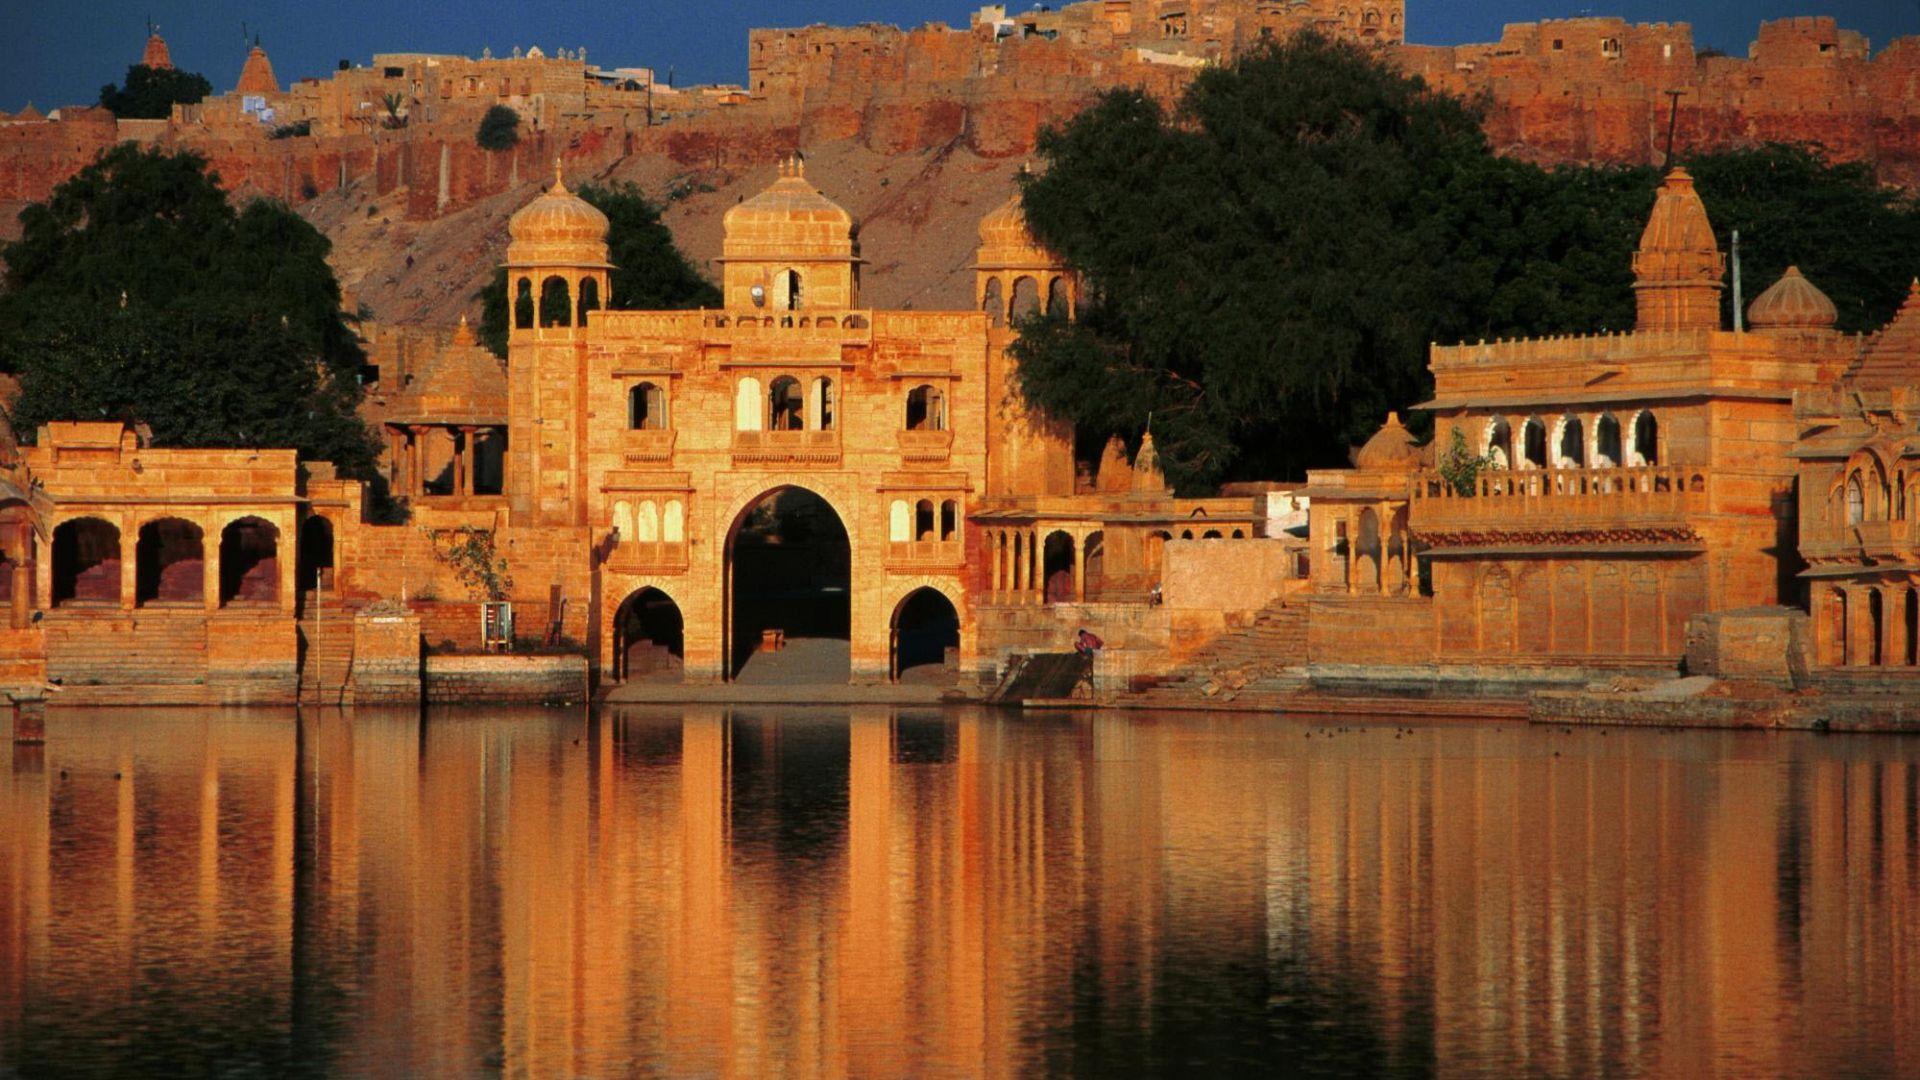 Download Wallpaper 1920x1080 india, structures, arches, water